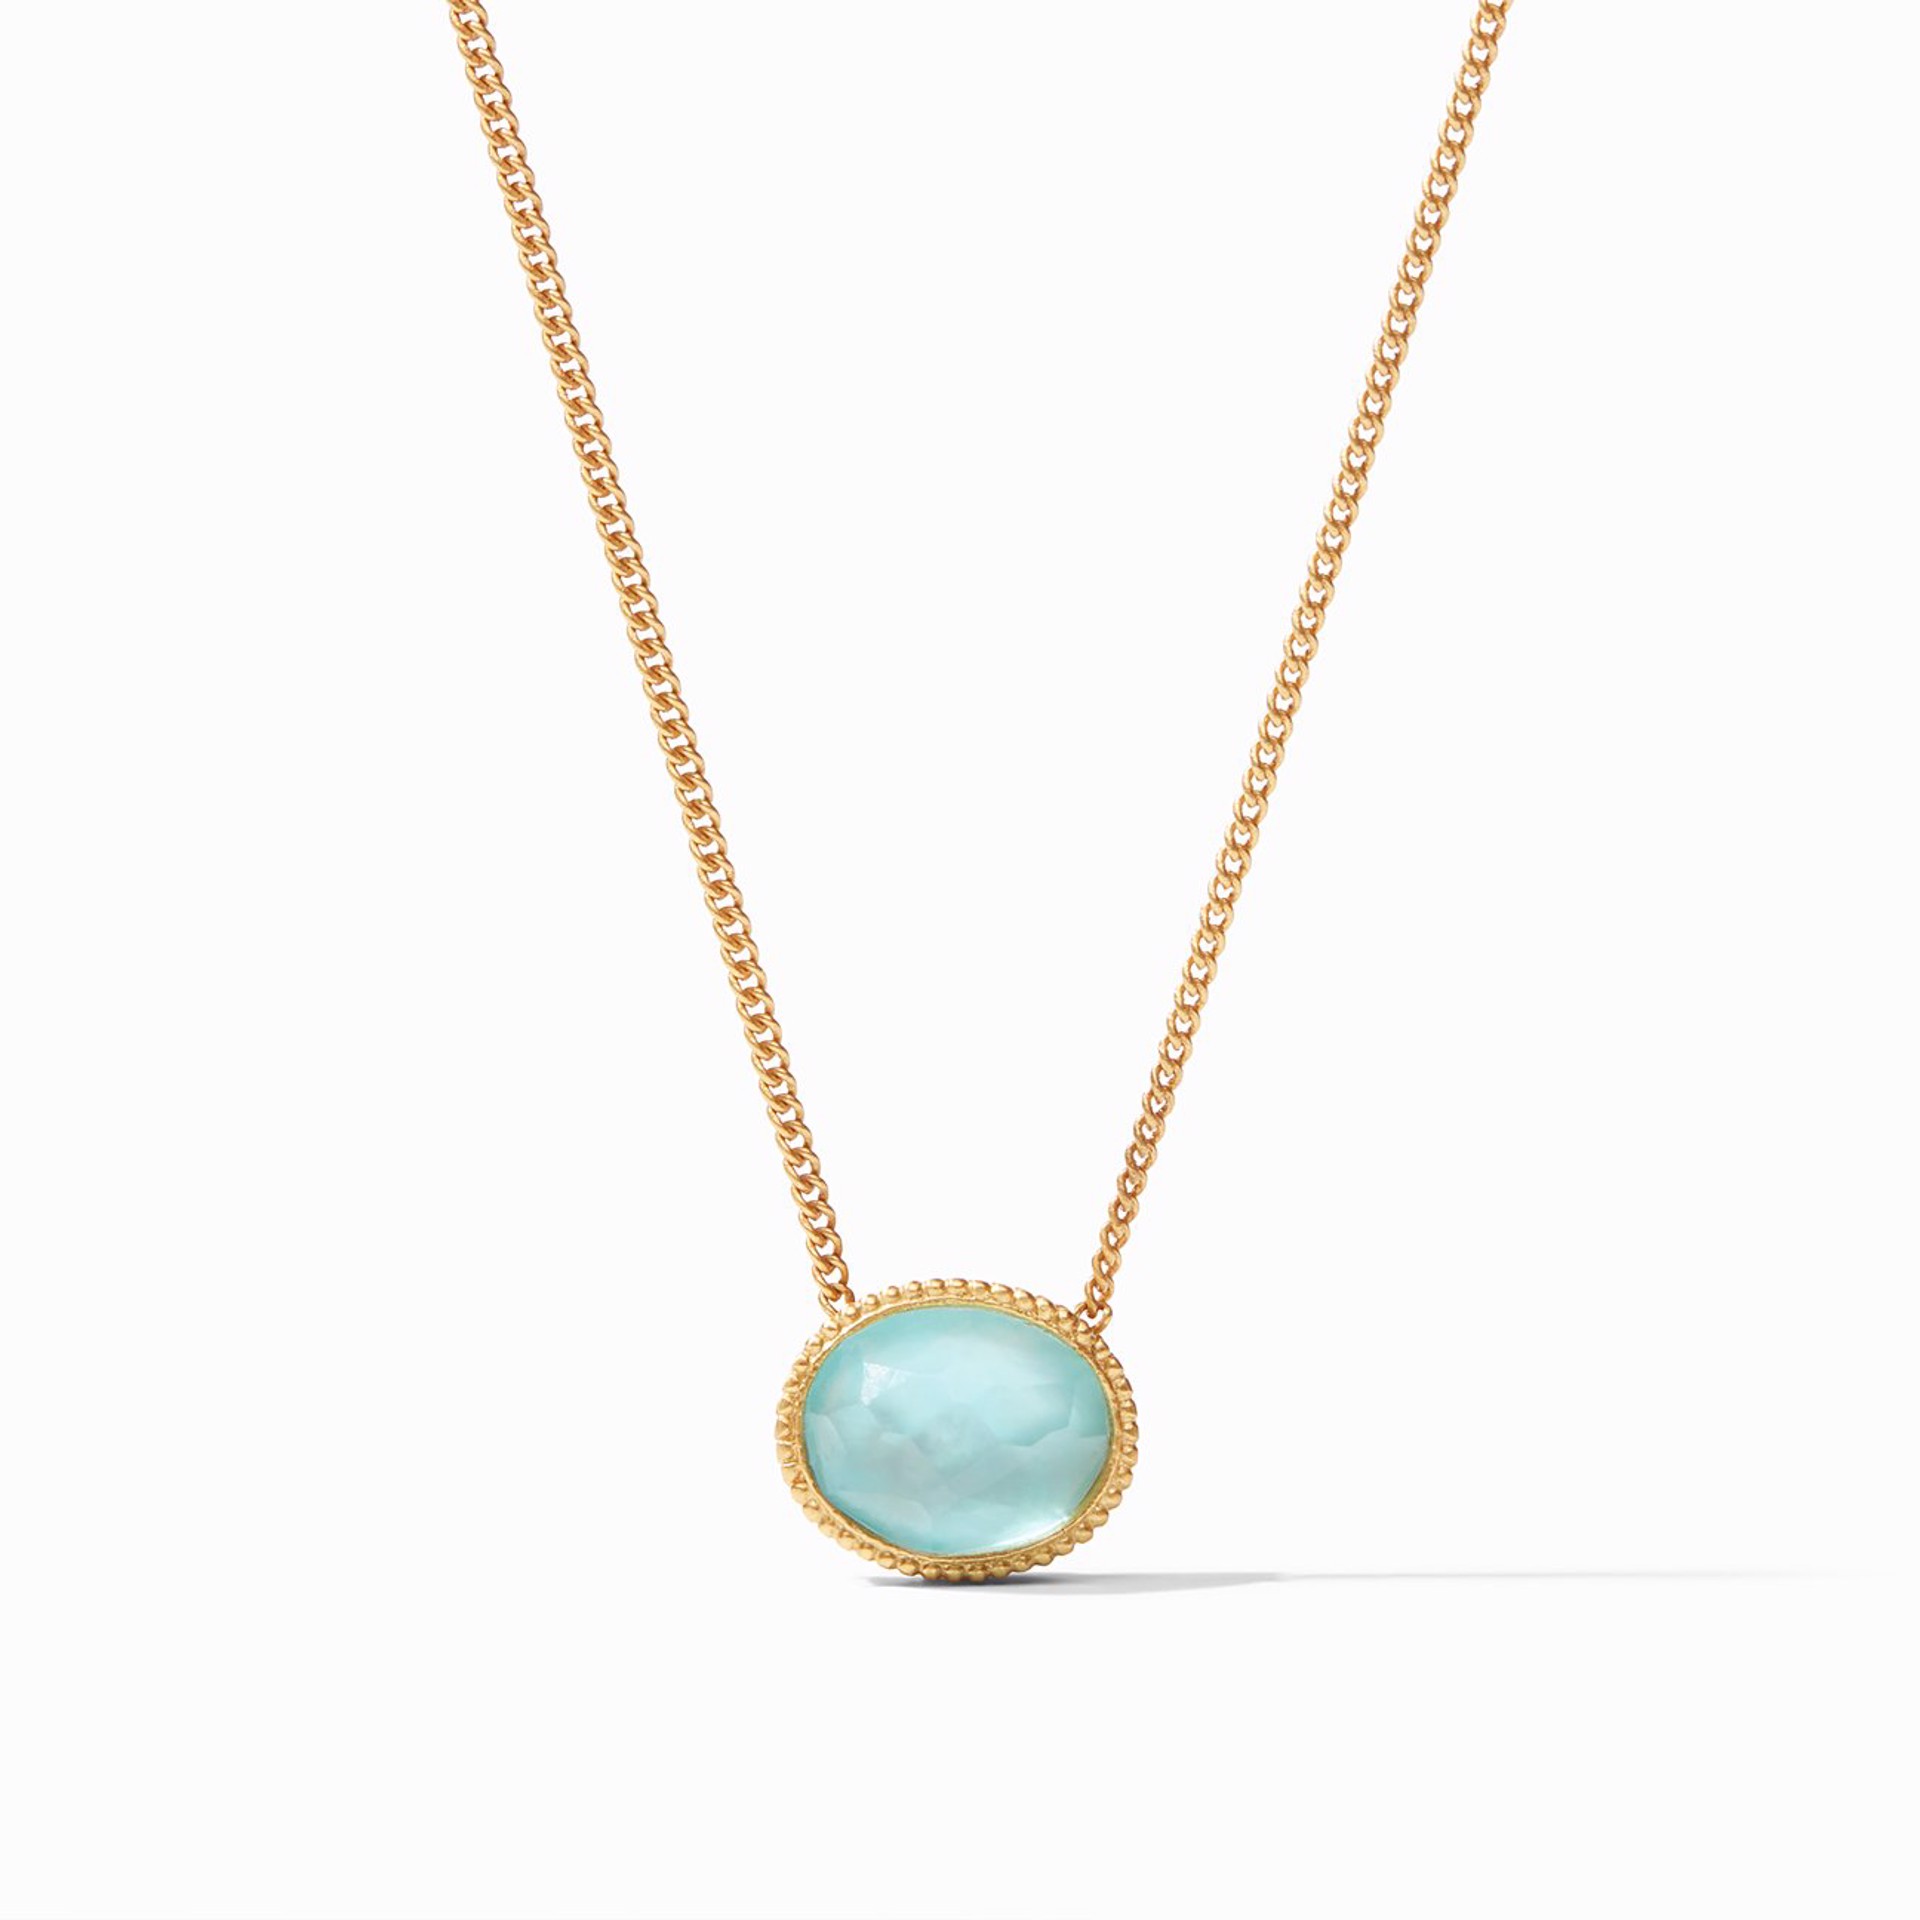 Verona Solitaire Necklace - Iridescent Bahamian Blue by Julie Vos